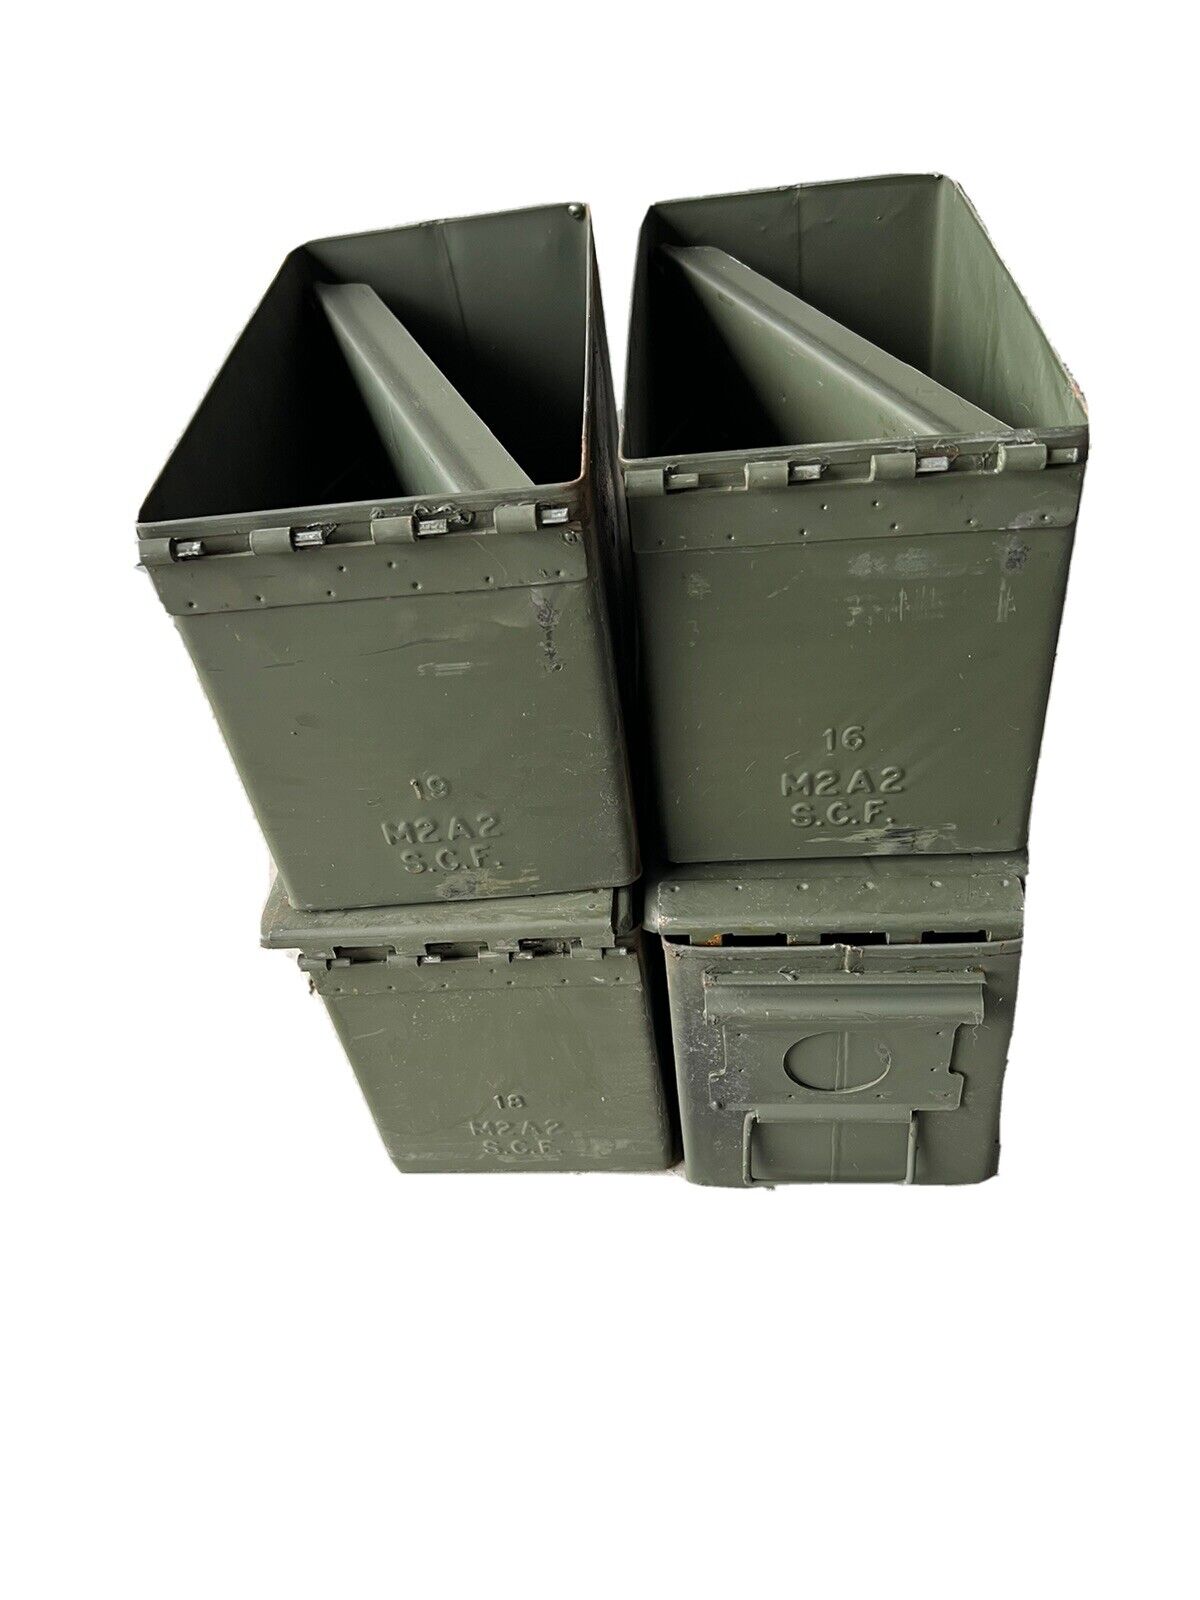 4 PACK Original .50 CALIBER 5.56mm AMMO CAN M2A1 50CAL METAL AMMO CAN BOX Empty